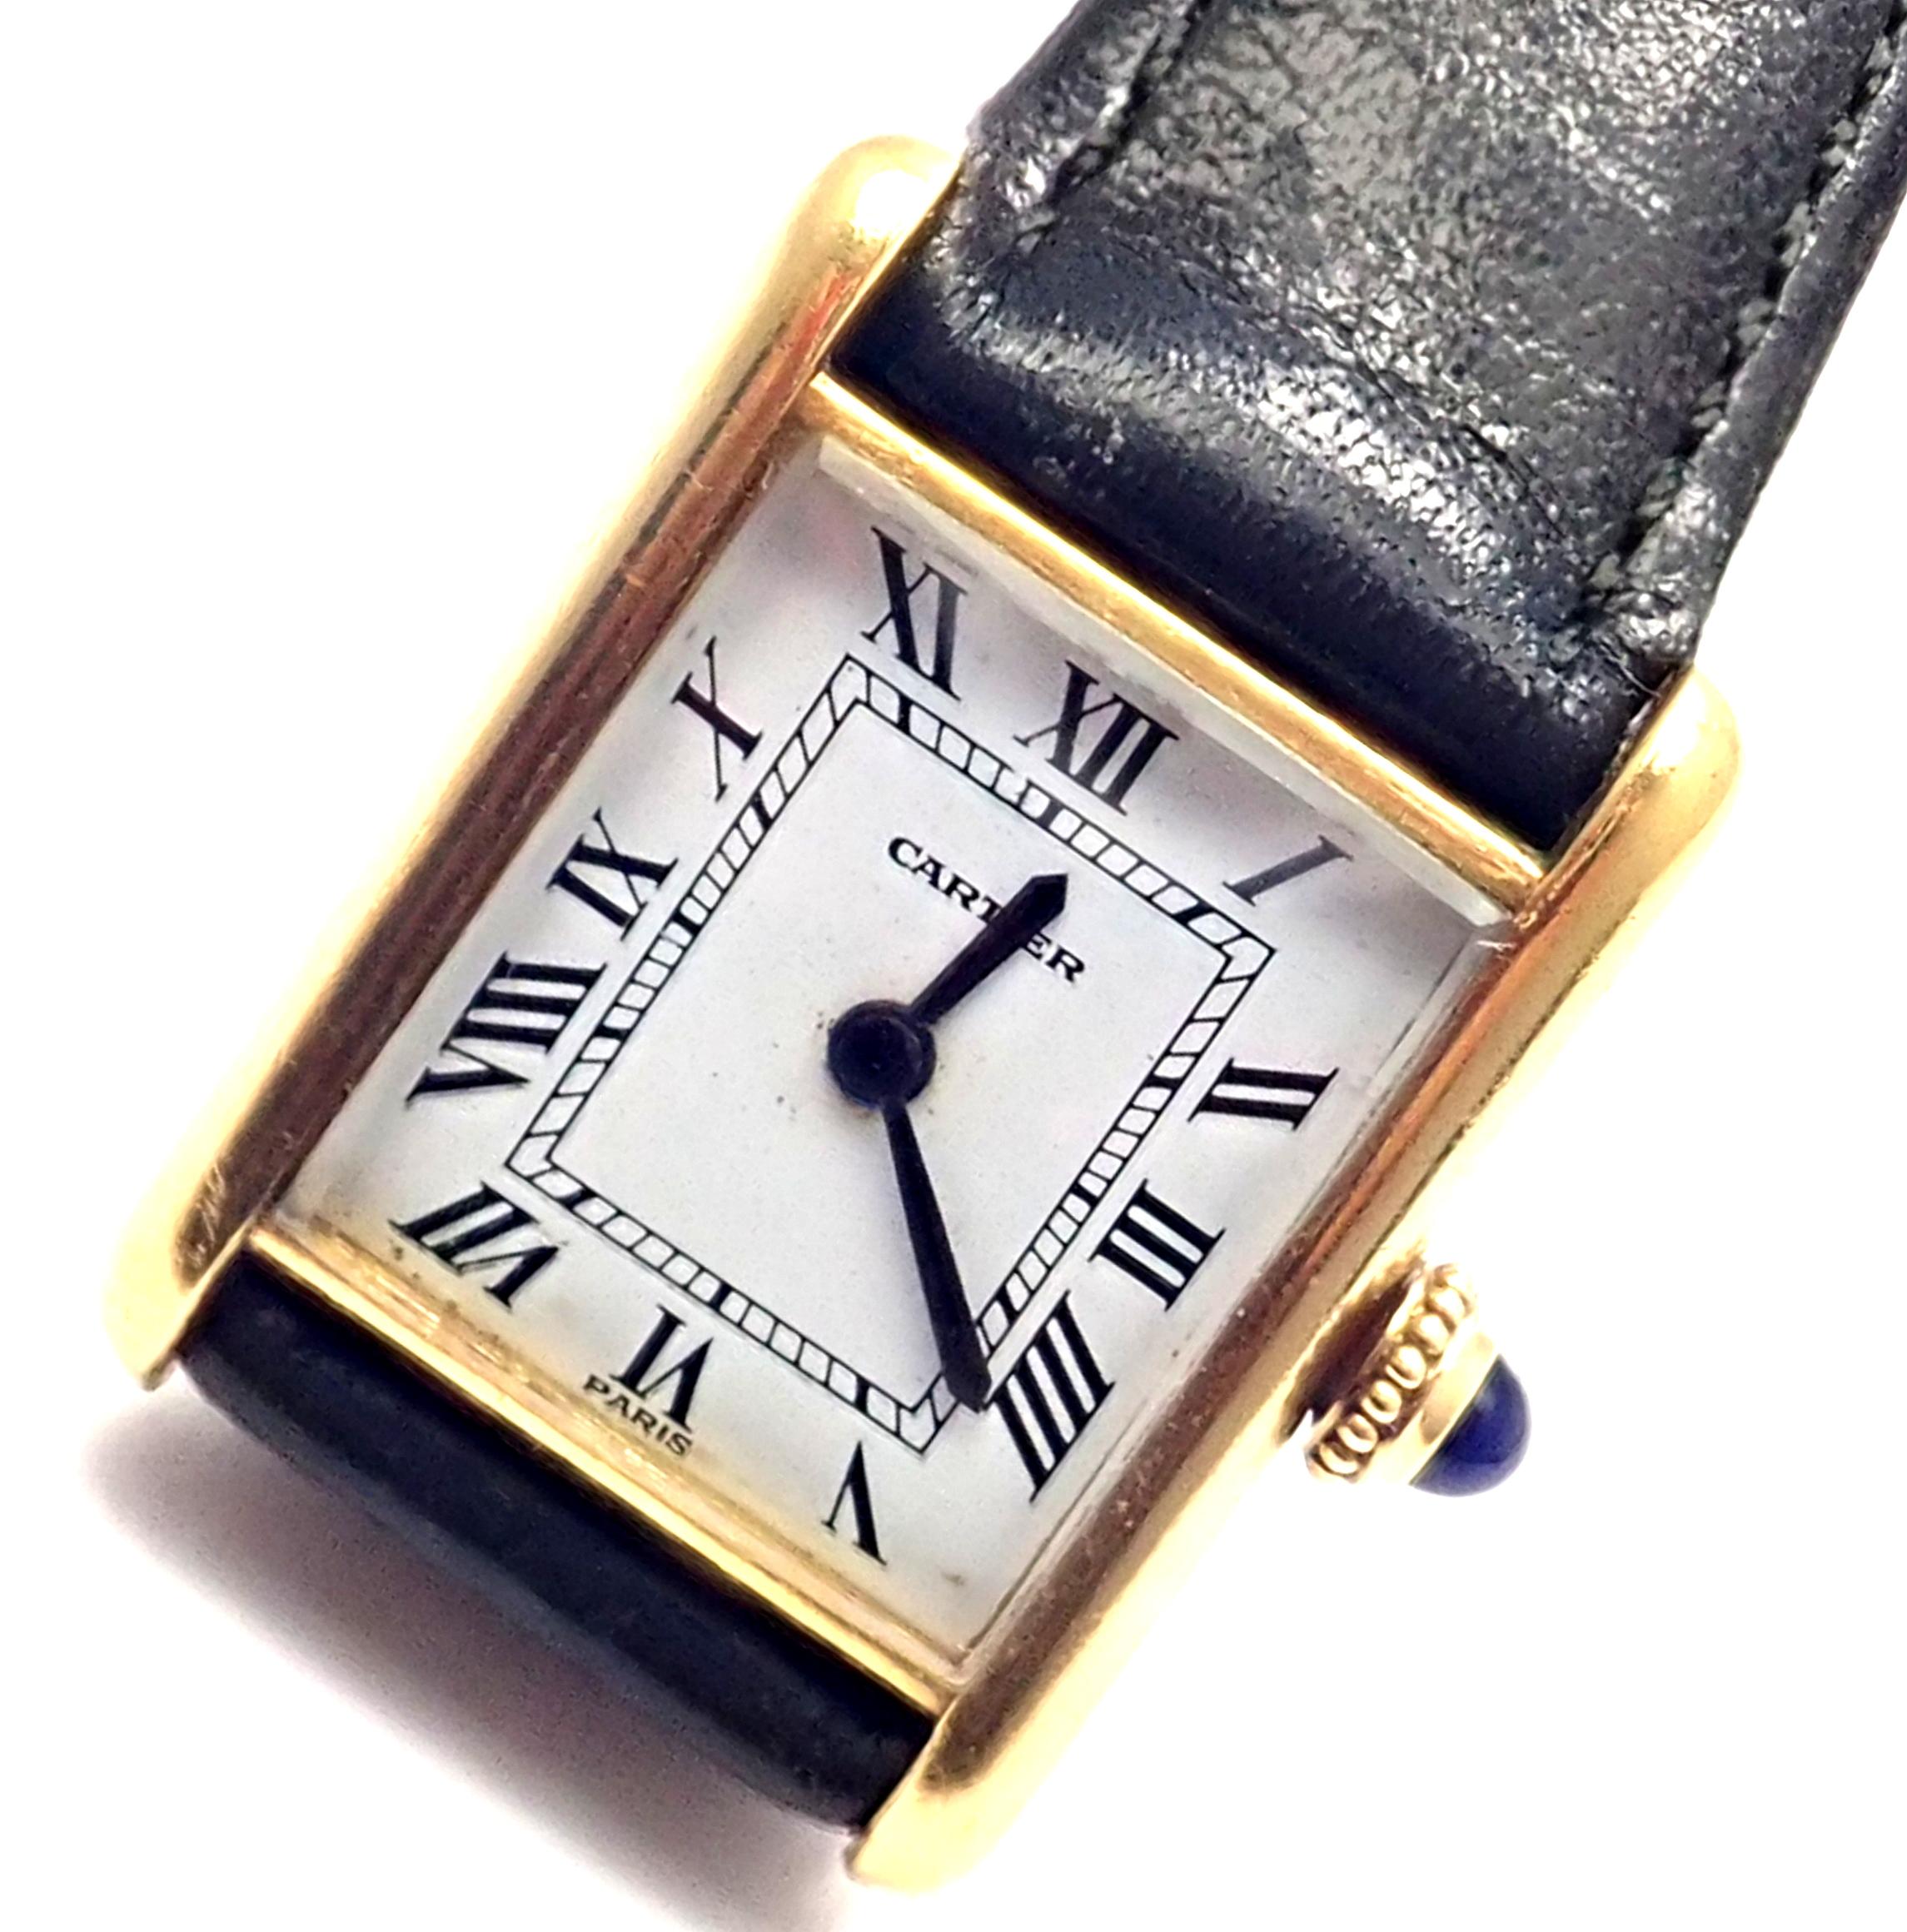 Lady's 18k yellow gold Cartier Mini Tank wristwatch.
Details: 
Brand: Cartier
Case Material: 18k Yellow Gold
Dial Color: White
Movement: Manual Wind
Functions: Hours, Minutes
Crystal: Cartier mineral glass crystal
Case: 26mm x 19mm
Crown: